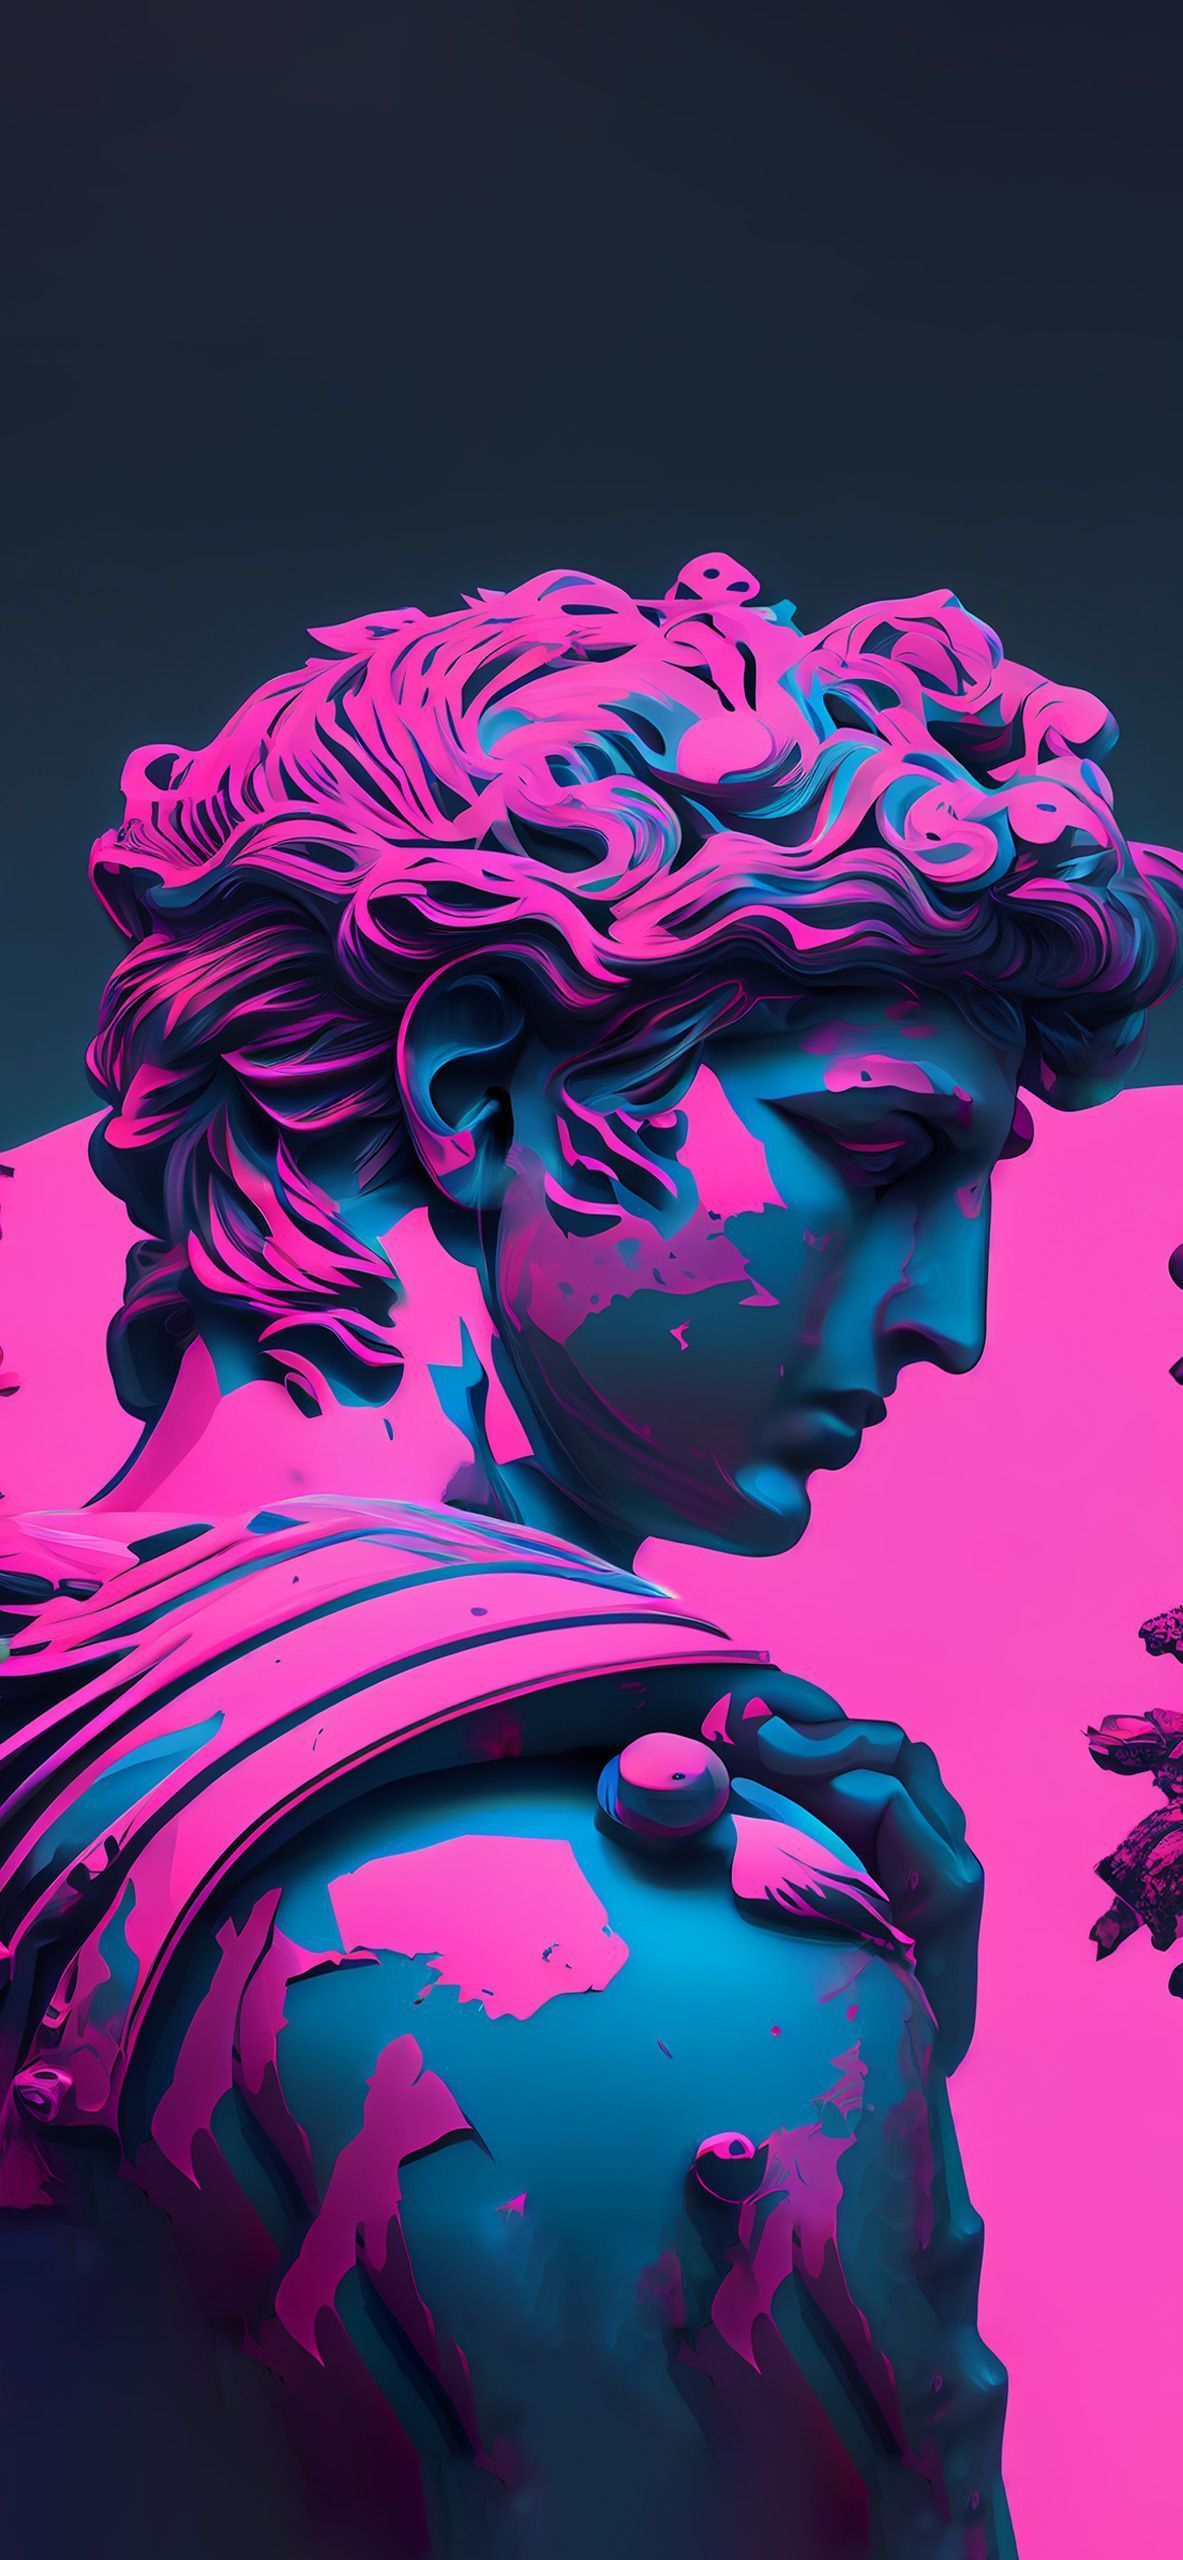 Aesthetic wallpaper of a statue with pink and blue colors - Neon, Greek statue, vaporwave, statue